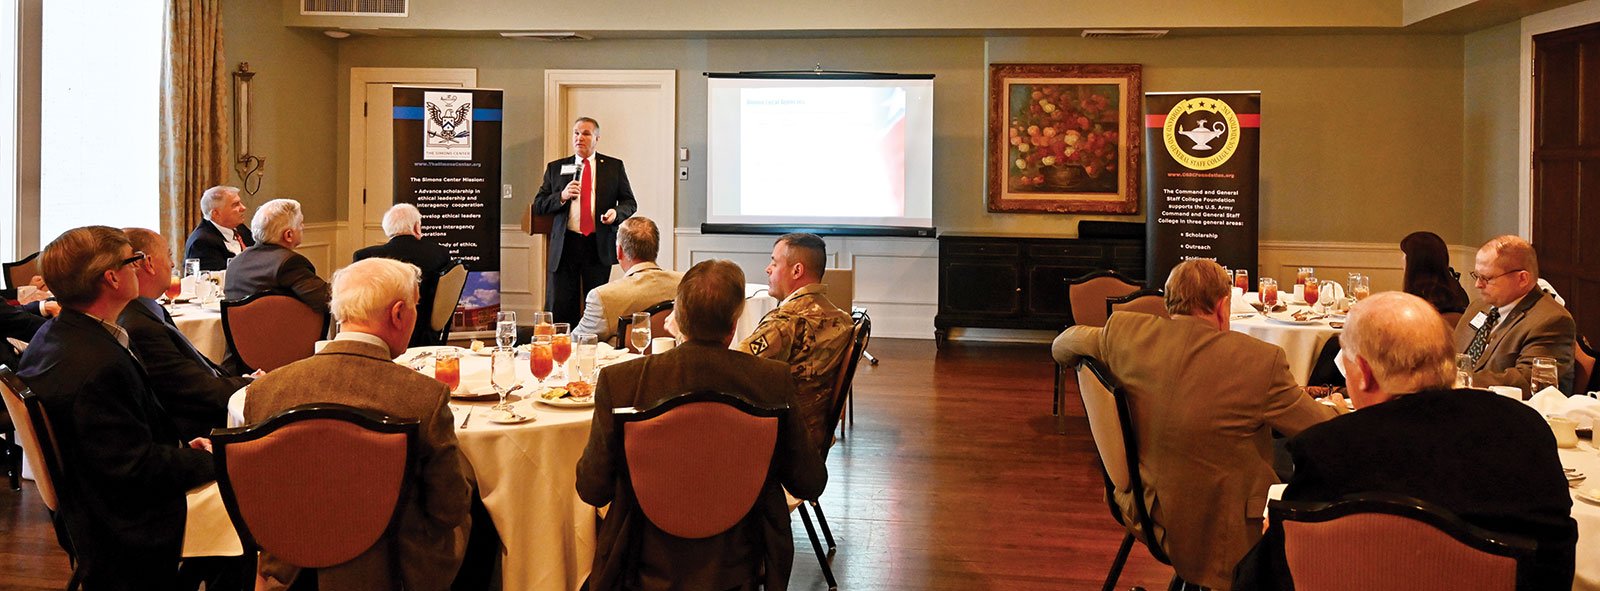 Larry A. Hisle, executive director of the Greater Kansas City Federal Executive Board (FEB), provides a presentation on the roles and missions of the Greater Kansas City Federal Executive Board to members of the Arter-Roland National Security Forum on Nov. 17, 2022, at the Carriage Club in Kansas City.